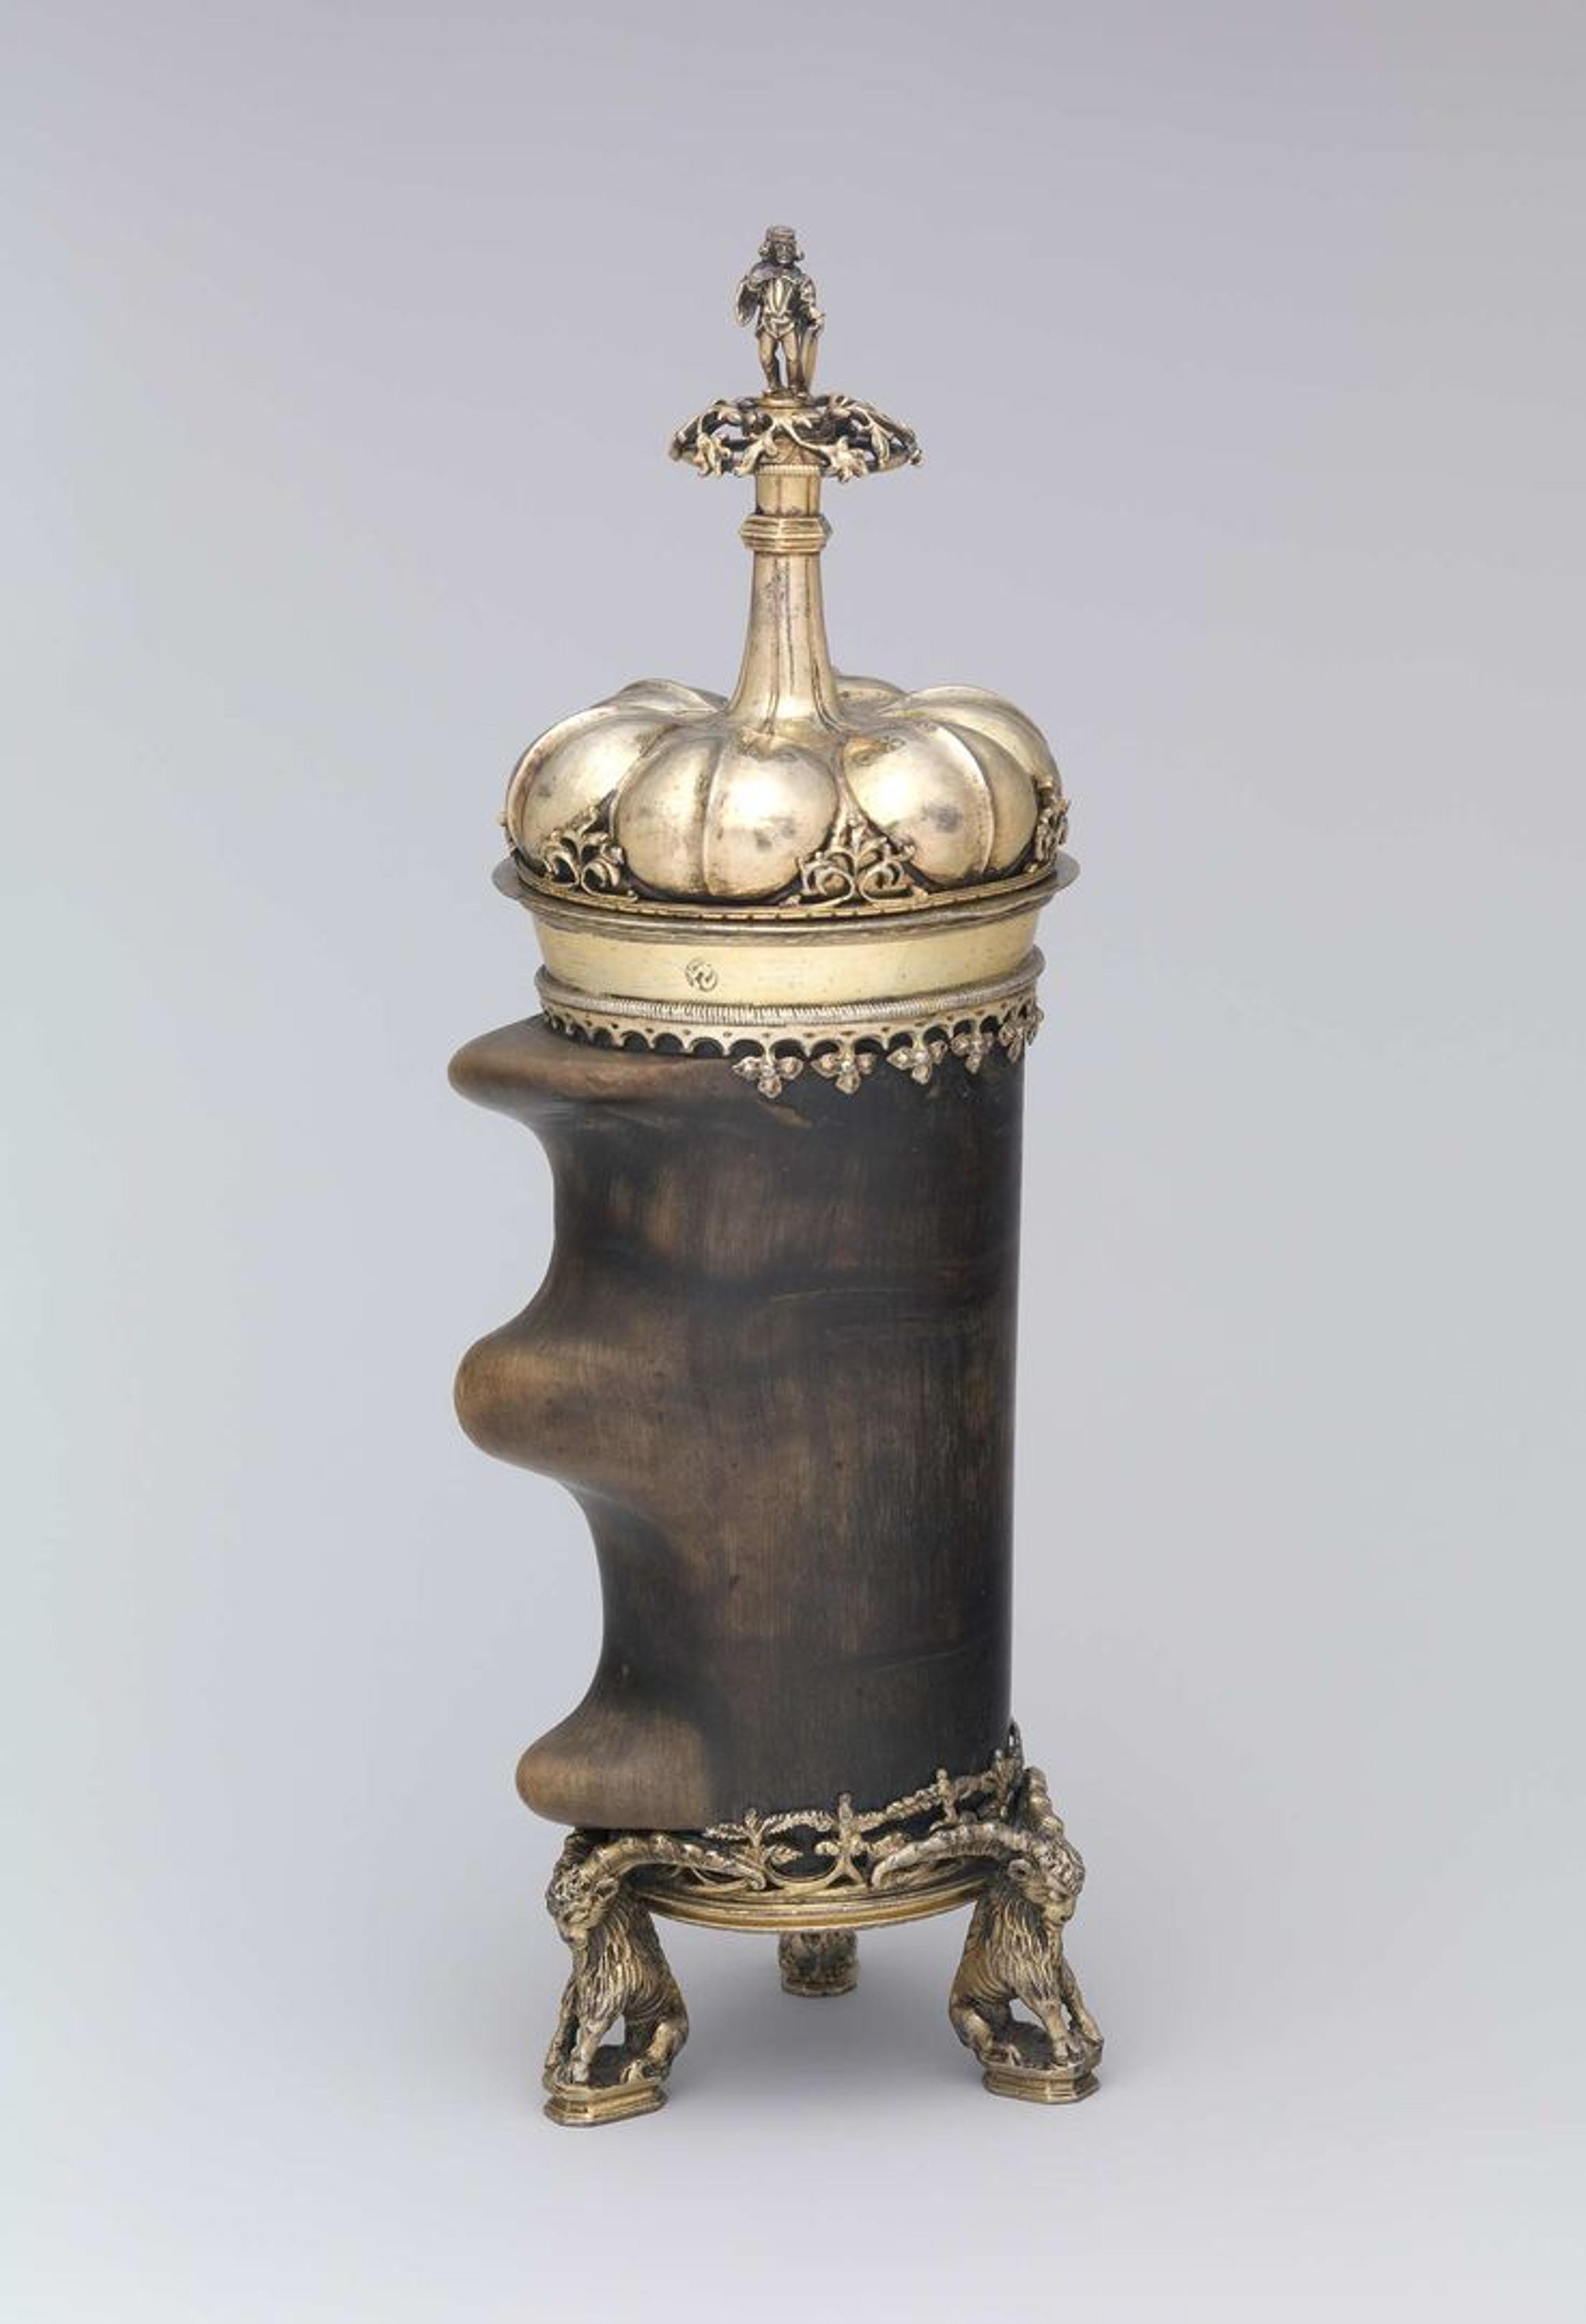 This drinking vessel has three metal legs and an ornate metal lid that rises into a small platform with a figure of a nobleman on the top. The body of the vessel is a dark brown section of a mountain goat horn with two ridges on the left side.